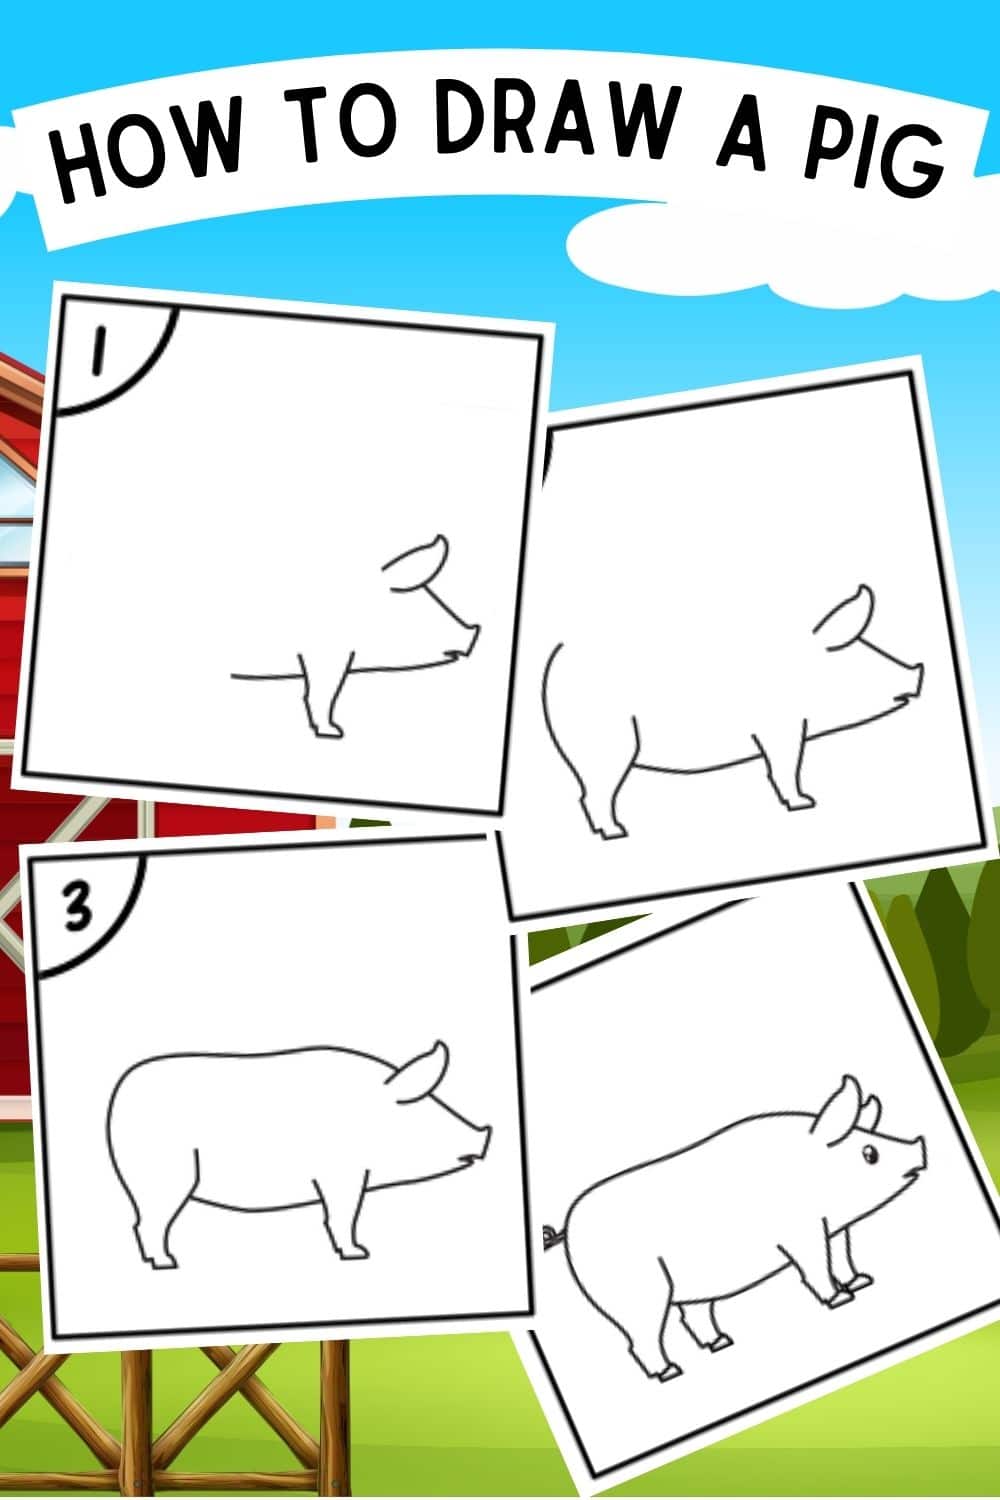 Learning how to draw a pig can be a fun and rewarding experience for kids of all ages. These easy DIY instructions make it simple to learn. #howtodrawapig #howtodraw #craftsforkids #kidscrafts #printablesforkids via @wondermomwannab